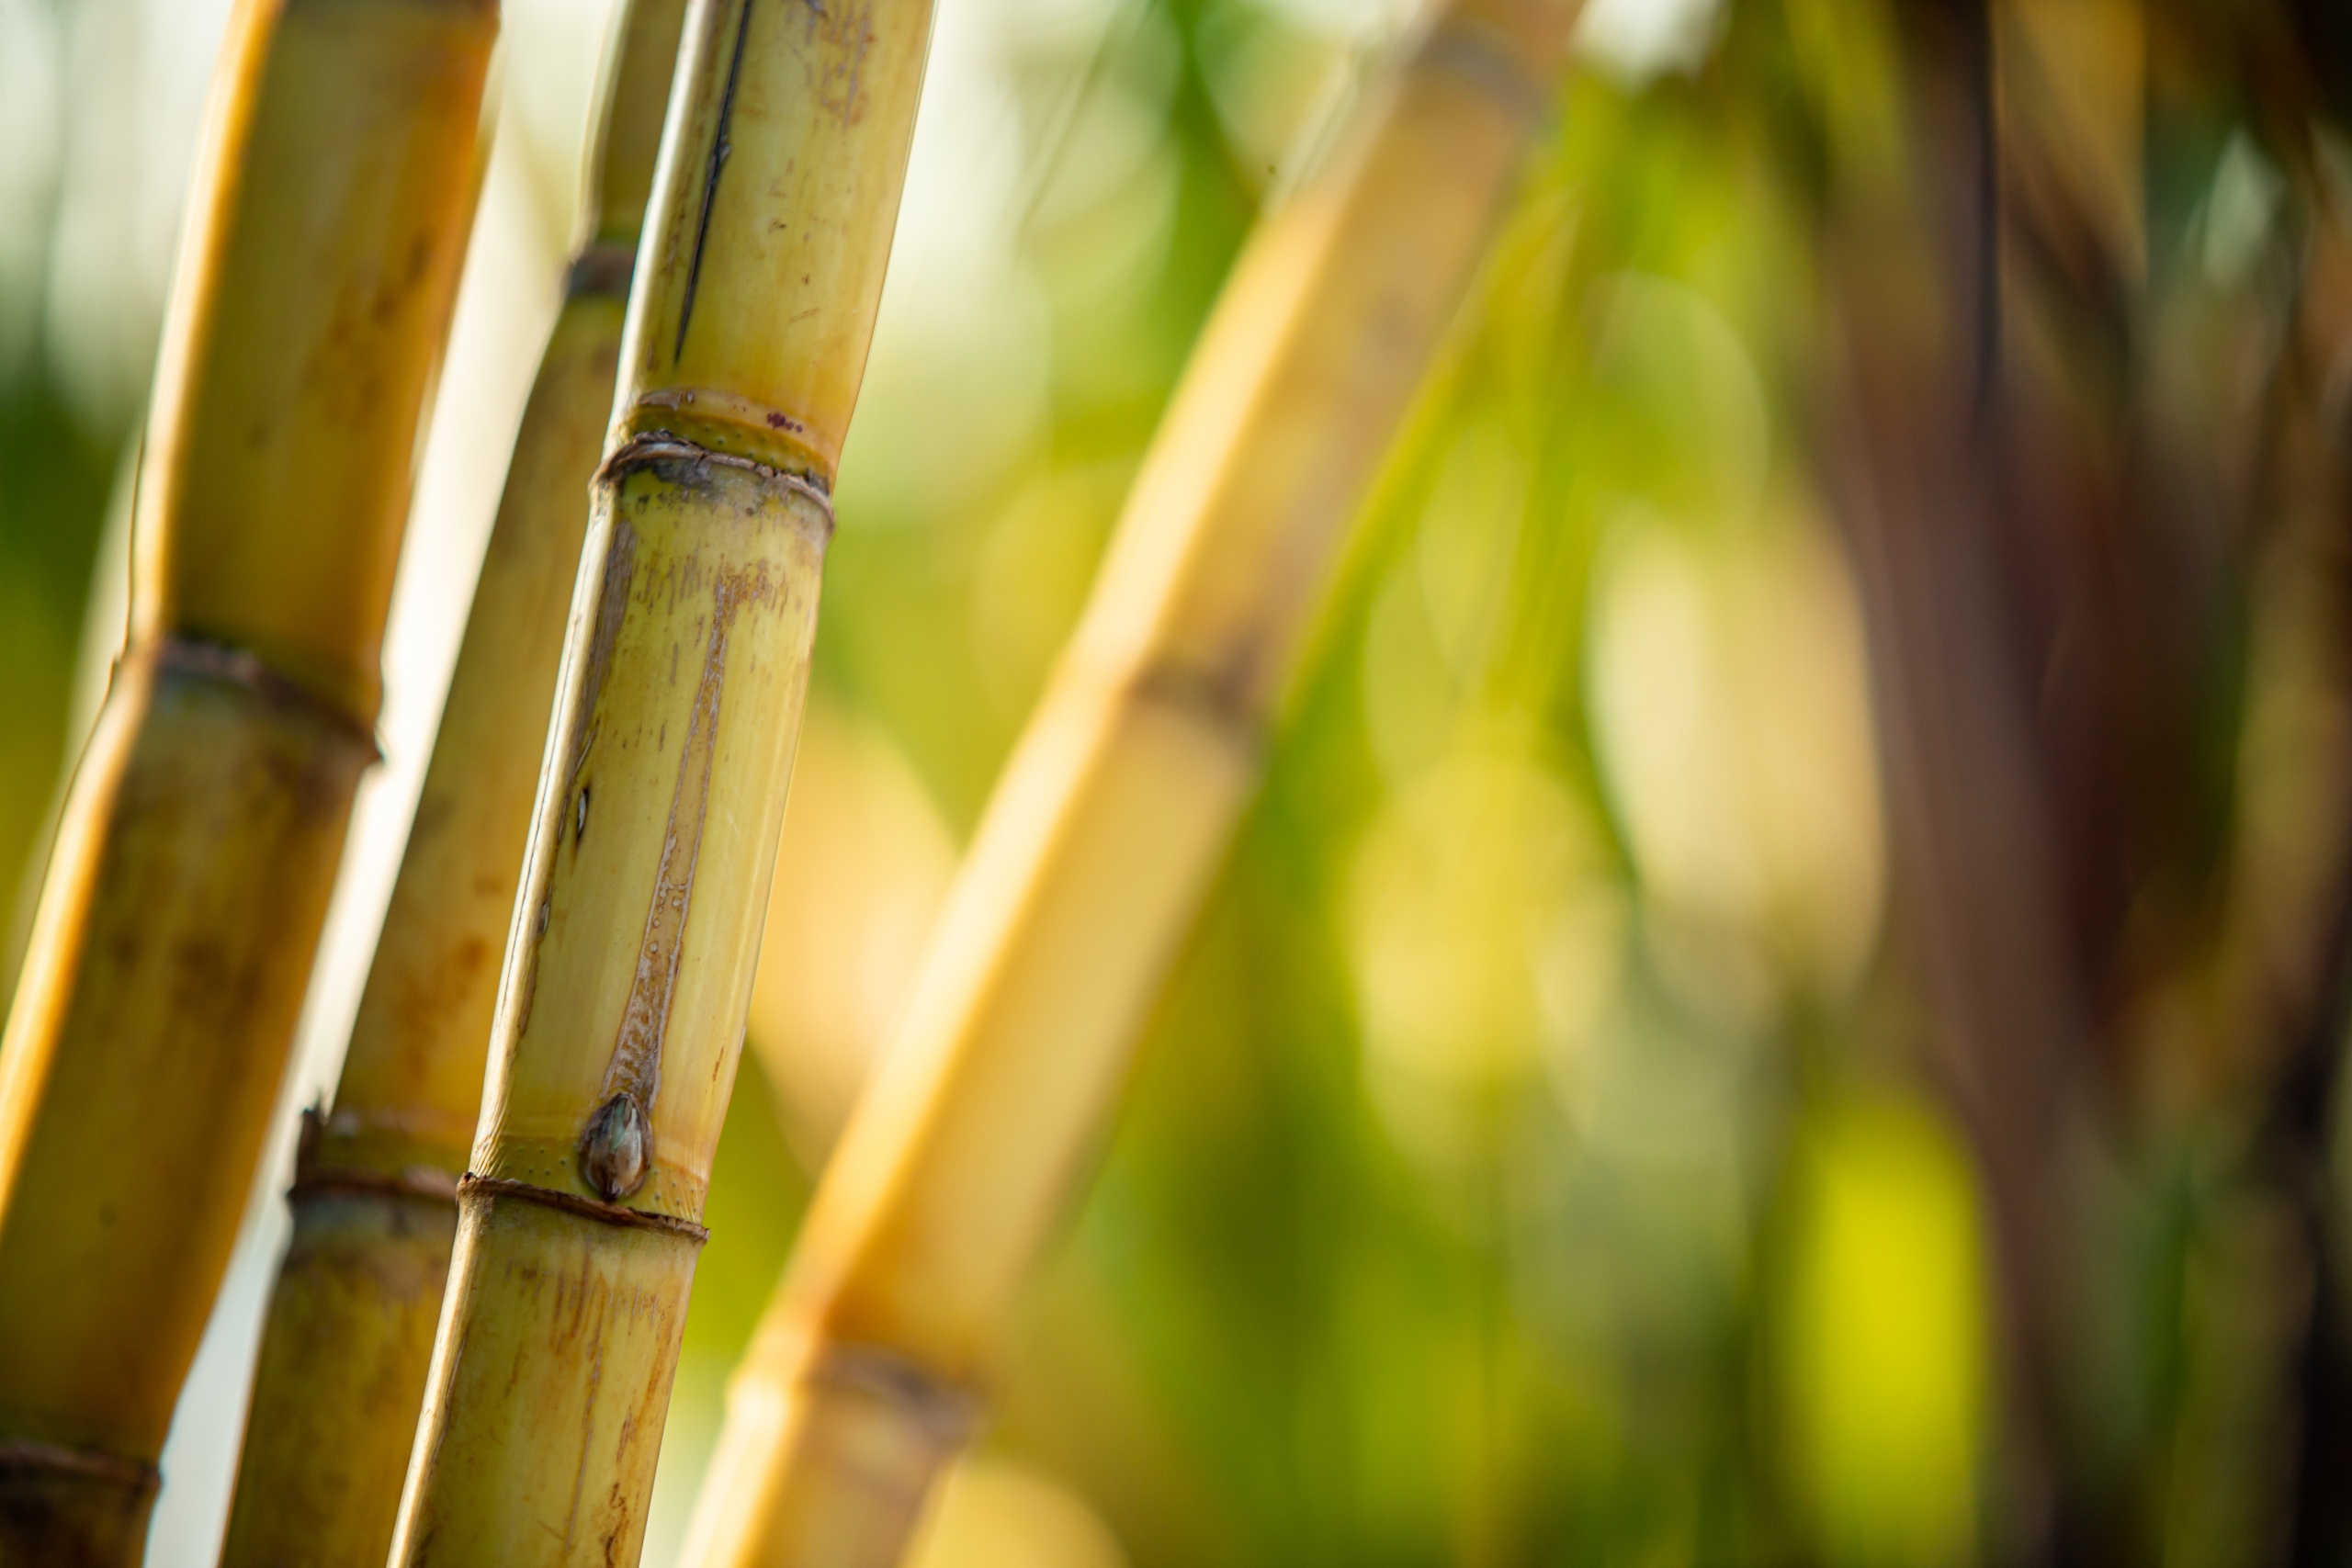 Sugarcane harvest for the second half of August 2020